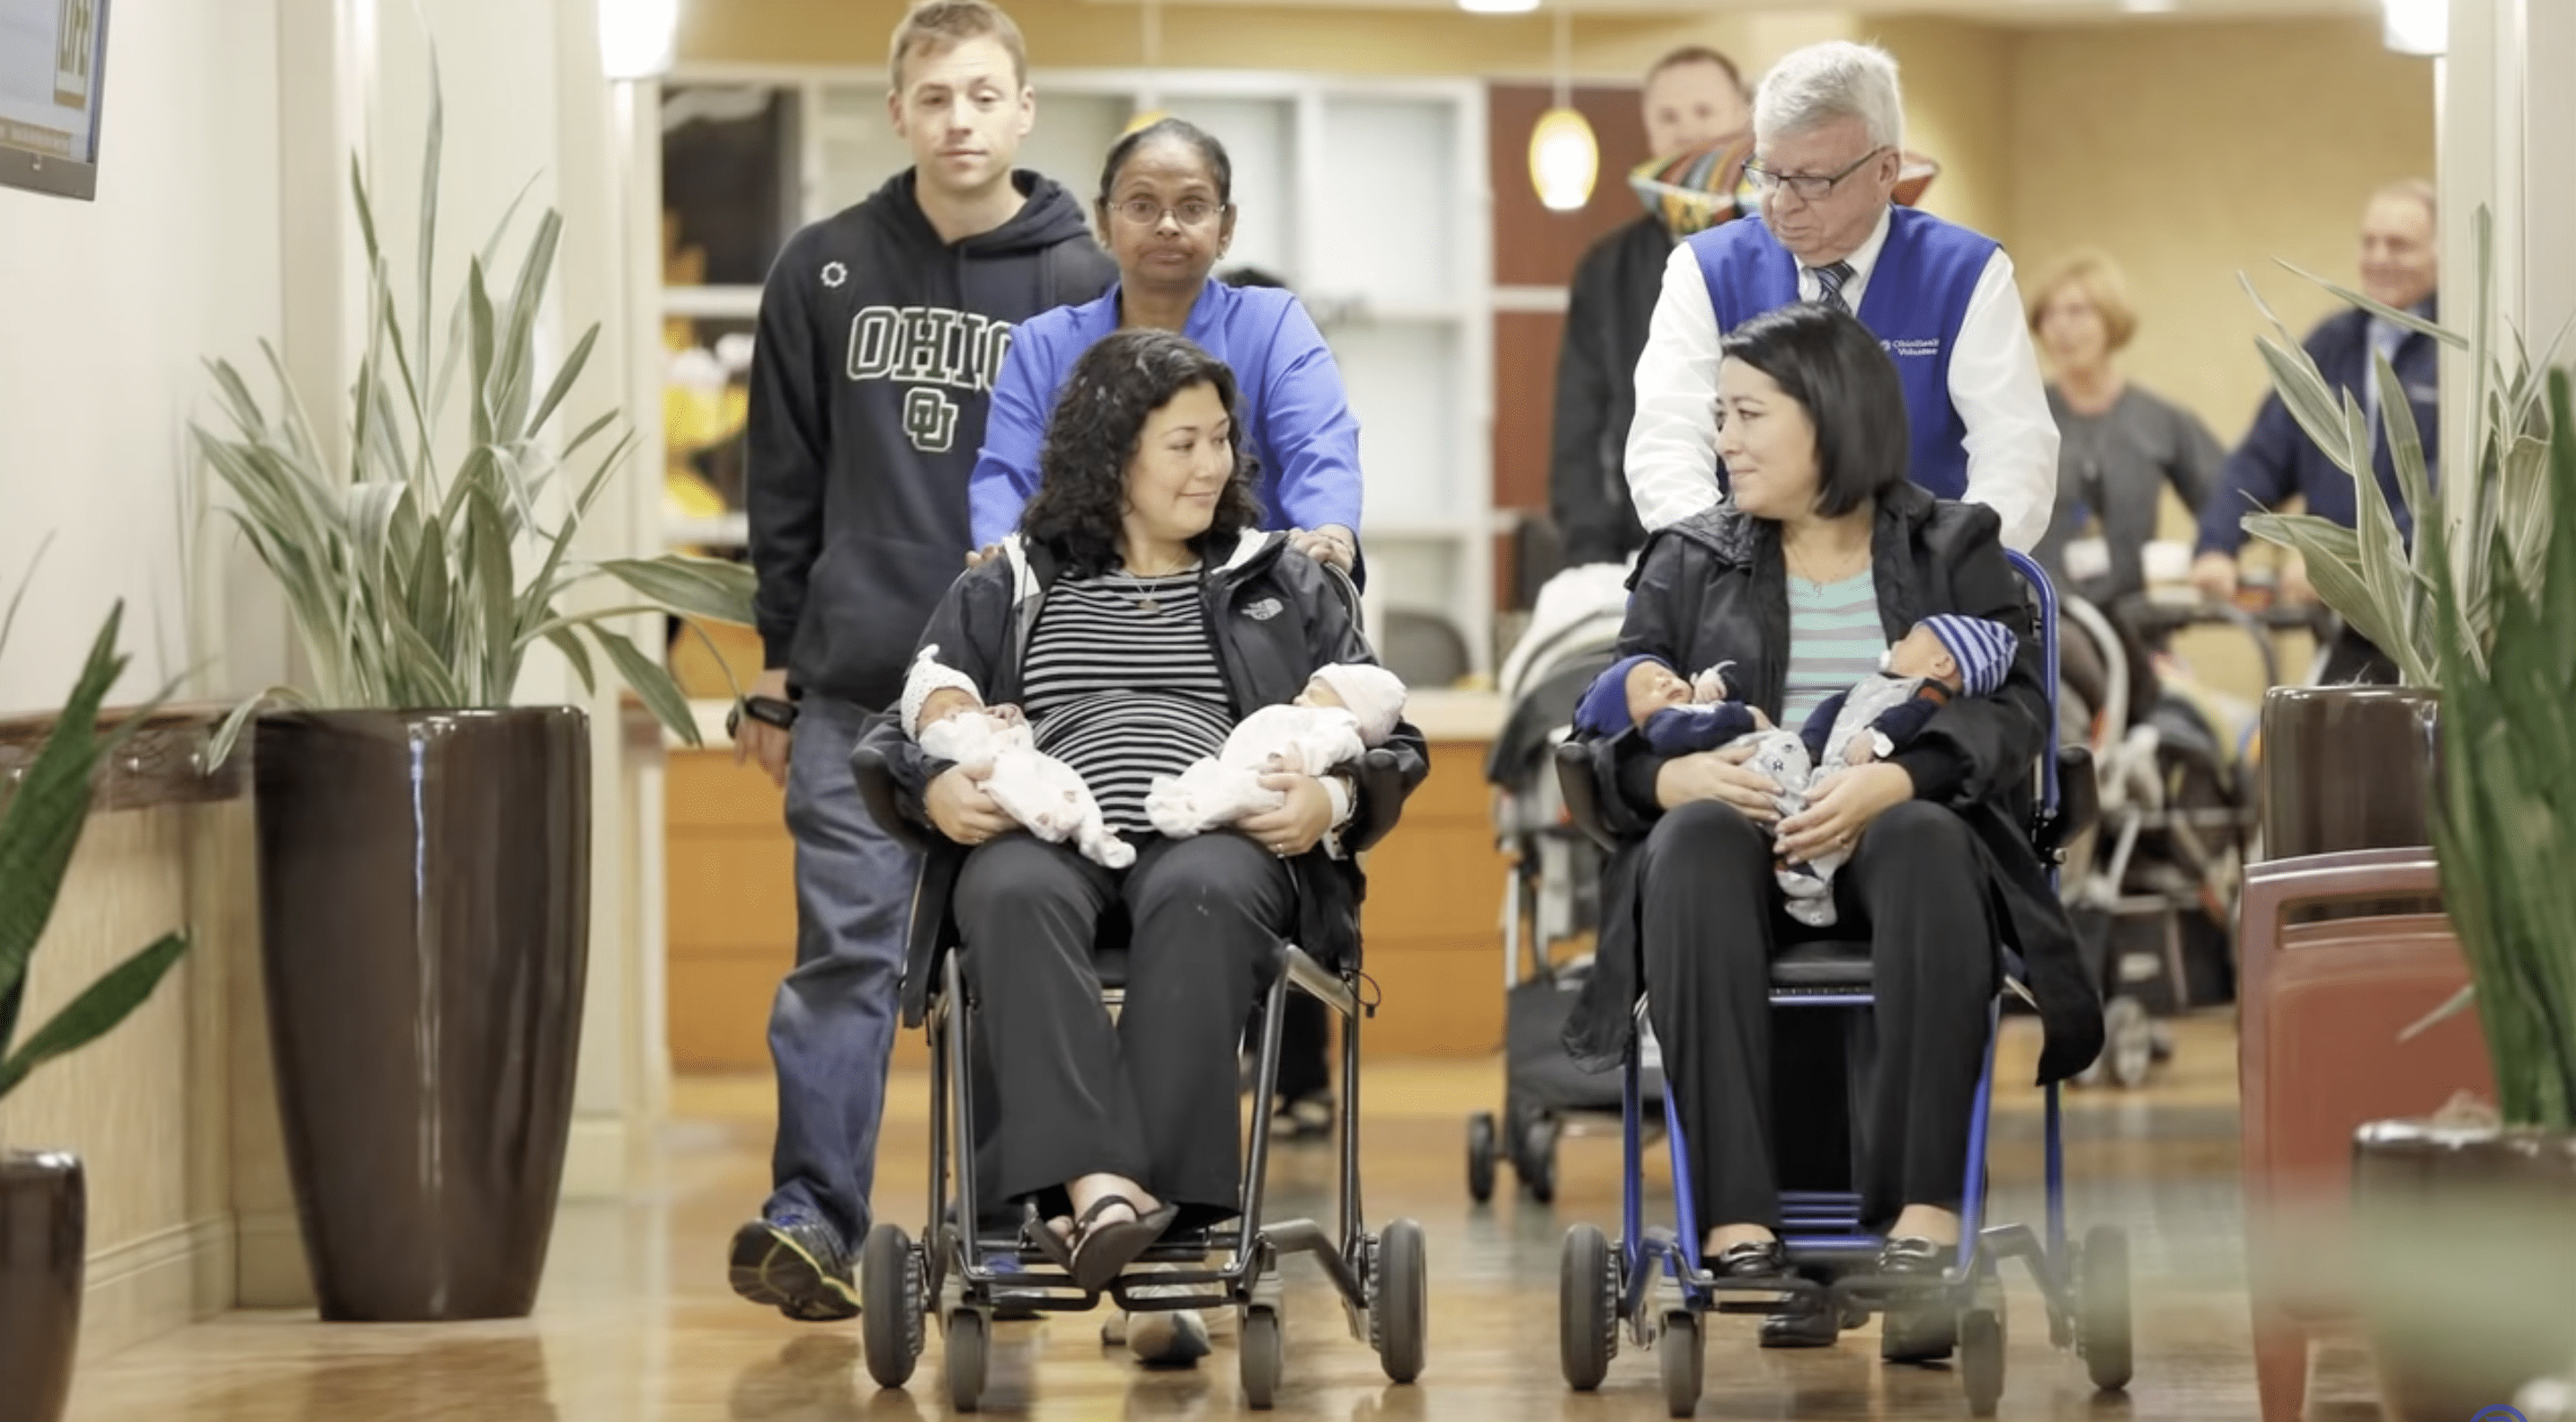 Annie Johnston and Chrissy Knott carrying the quadruplets. | Photo: YouTube.com/TheColumbusDispatch